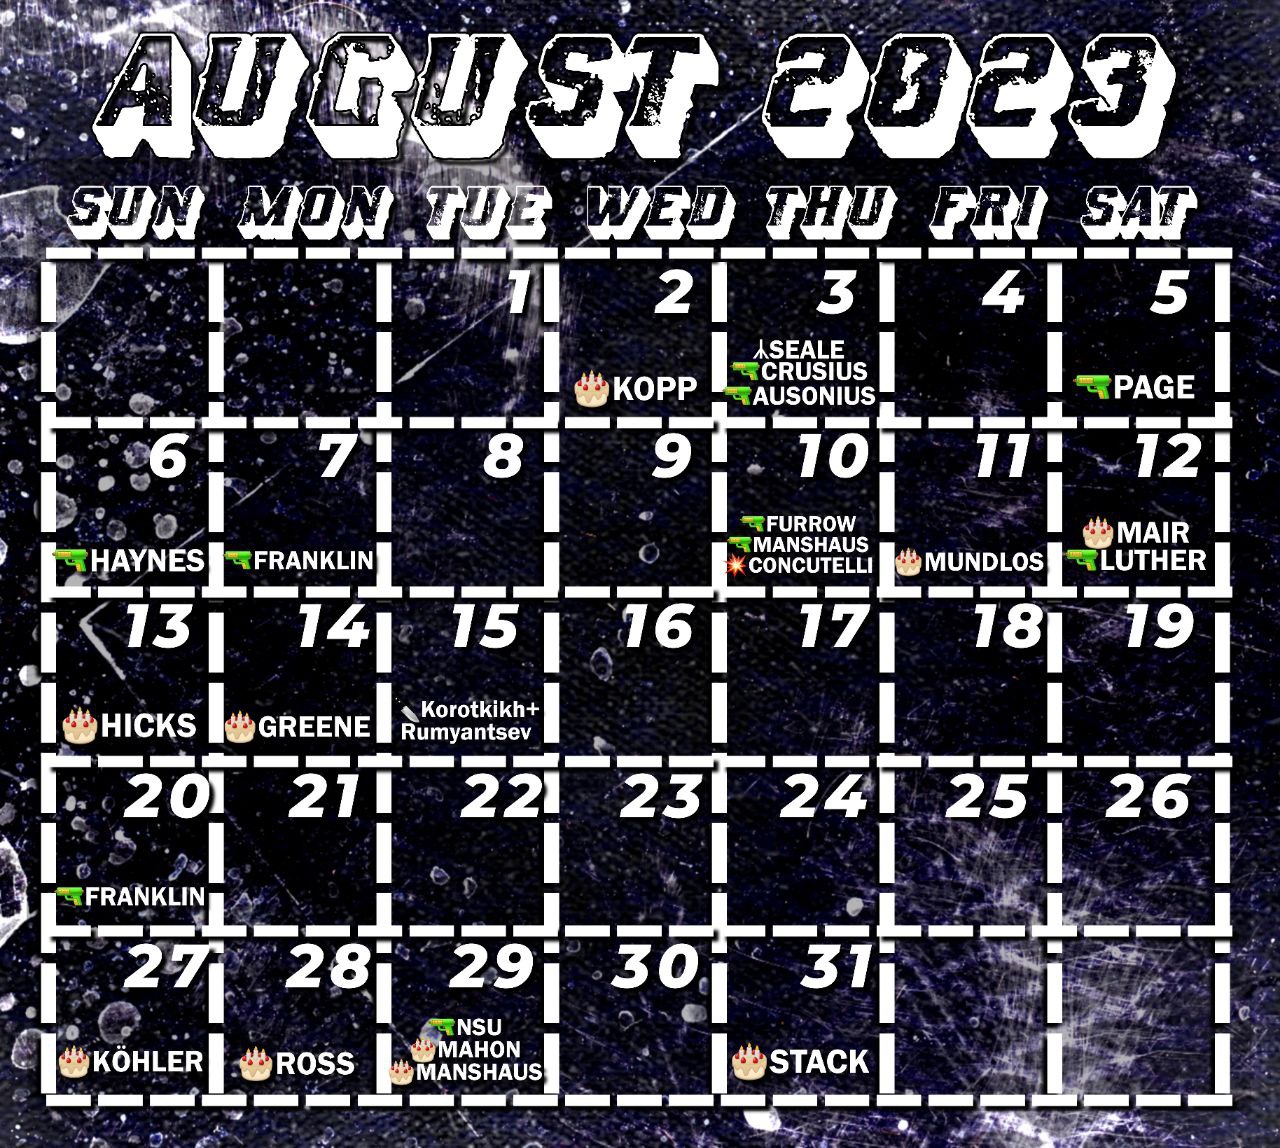 (Right Wing Extremism/ Poster) Eco-Fascist Telegram Channel: Saint Calendar for August 2023 - 1 August 2023